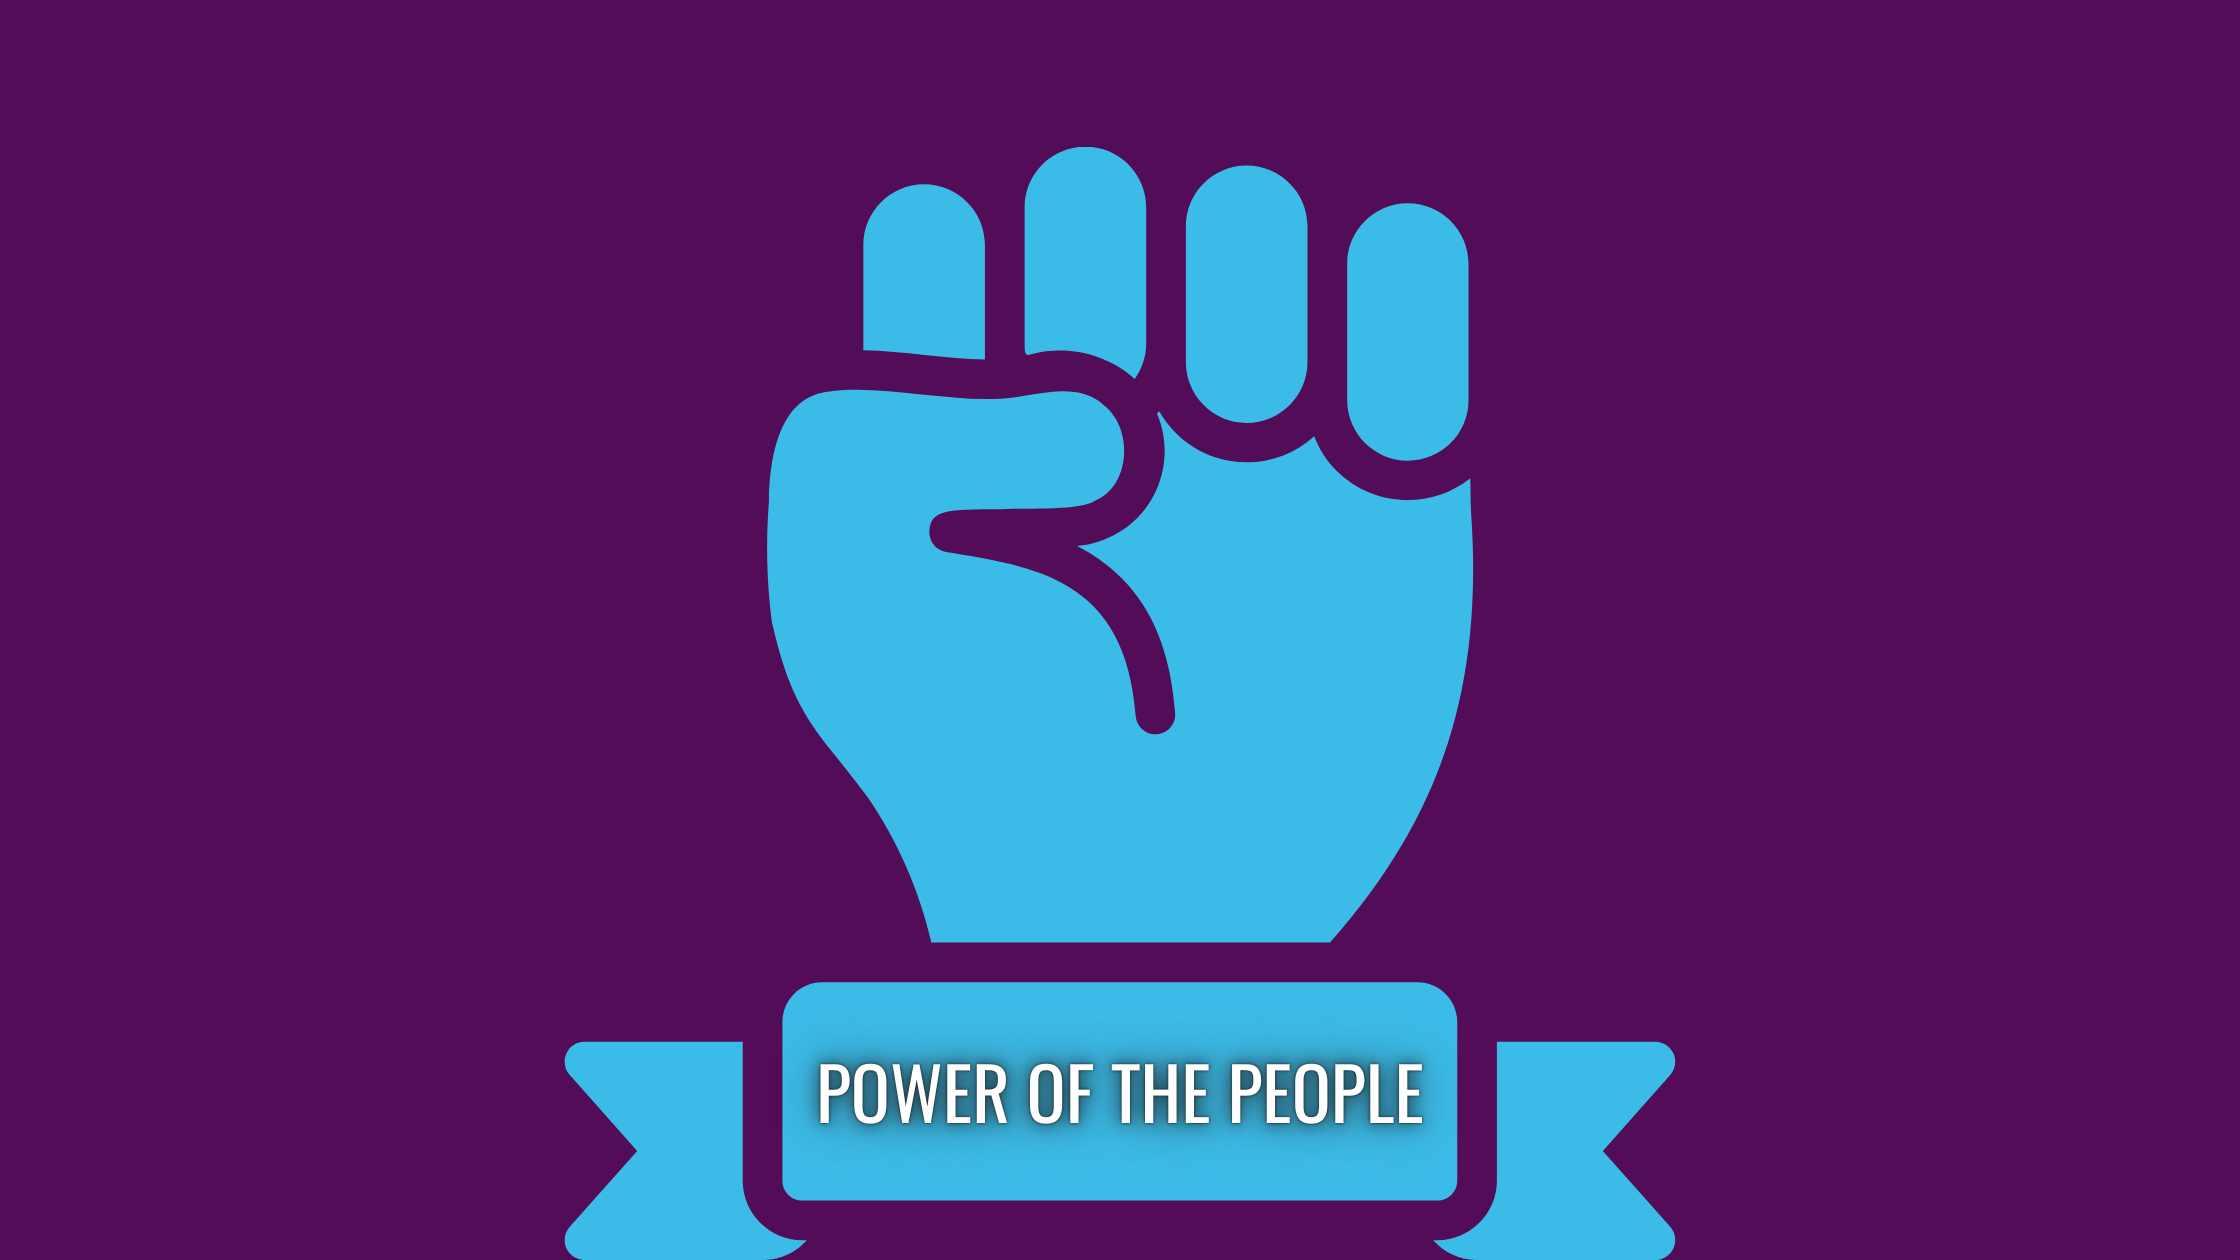 power of the people image